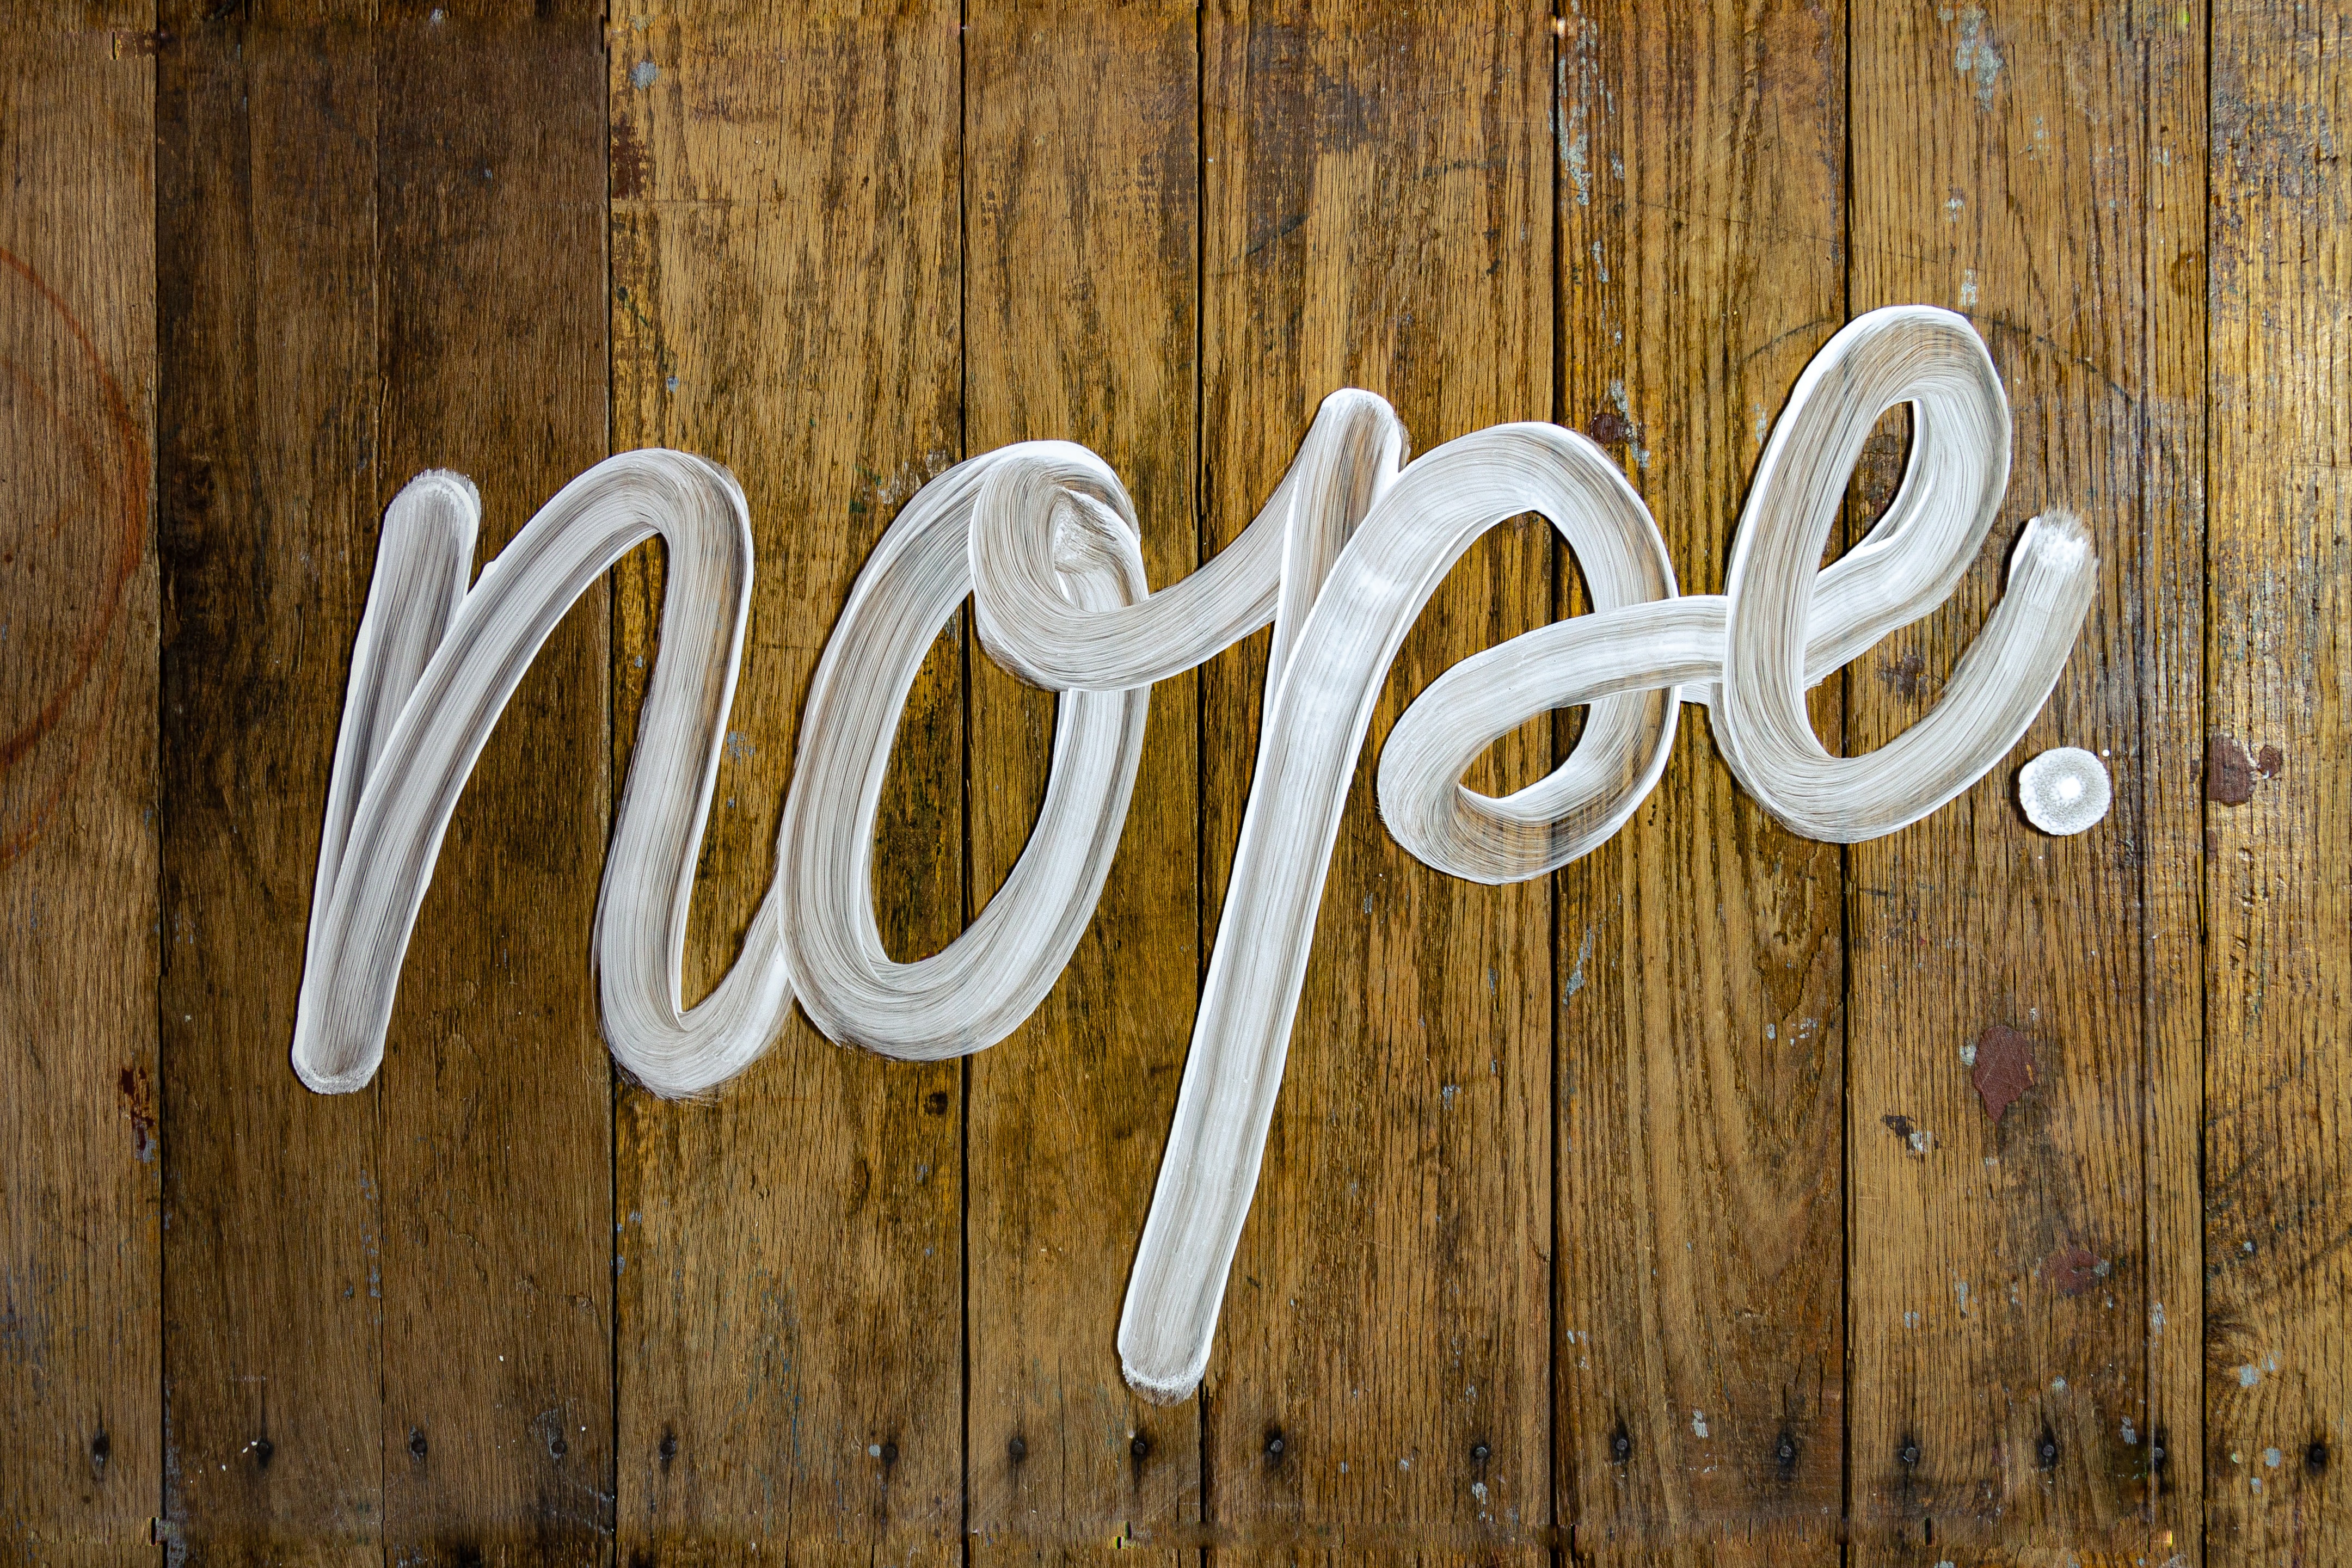 The word 'nope' written in cursive on a wood background